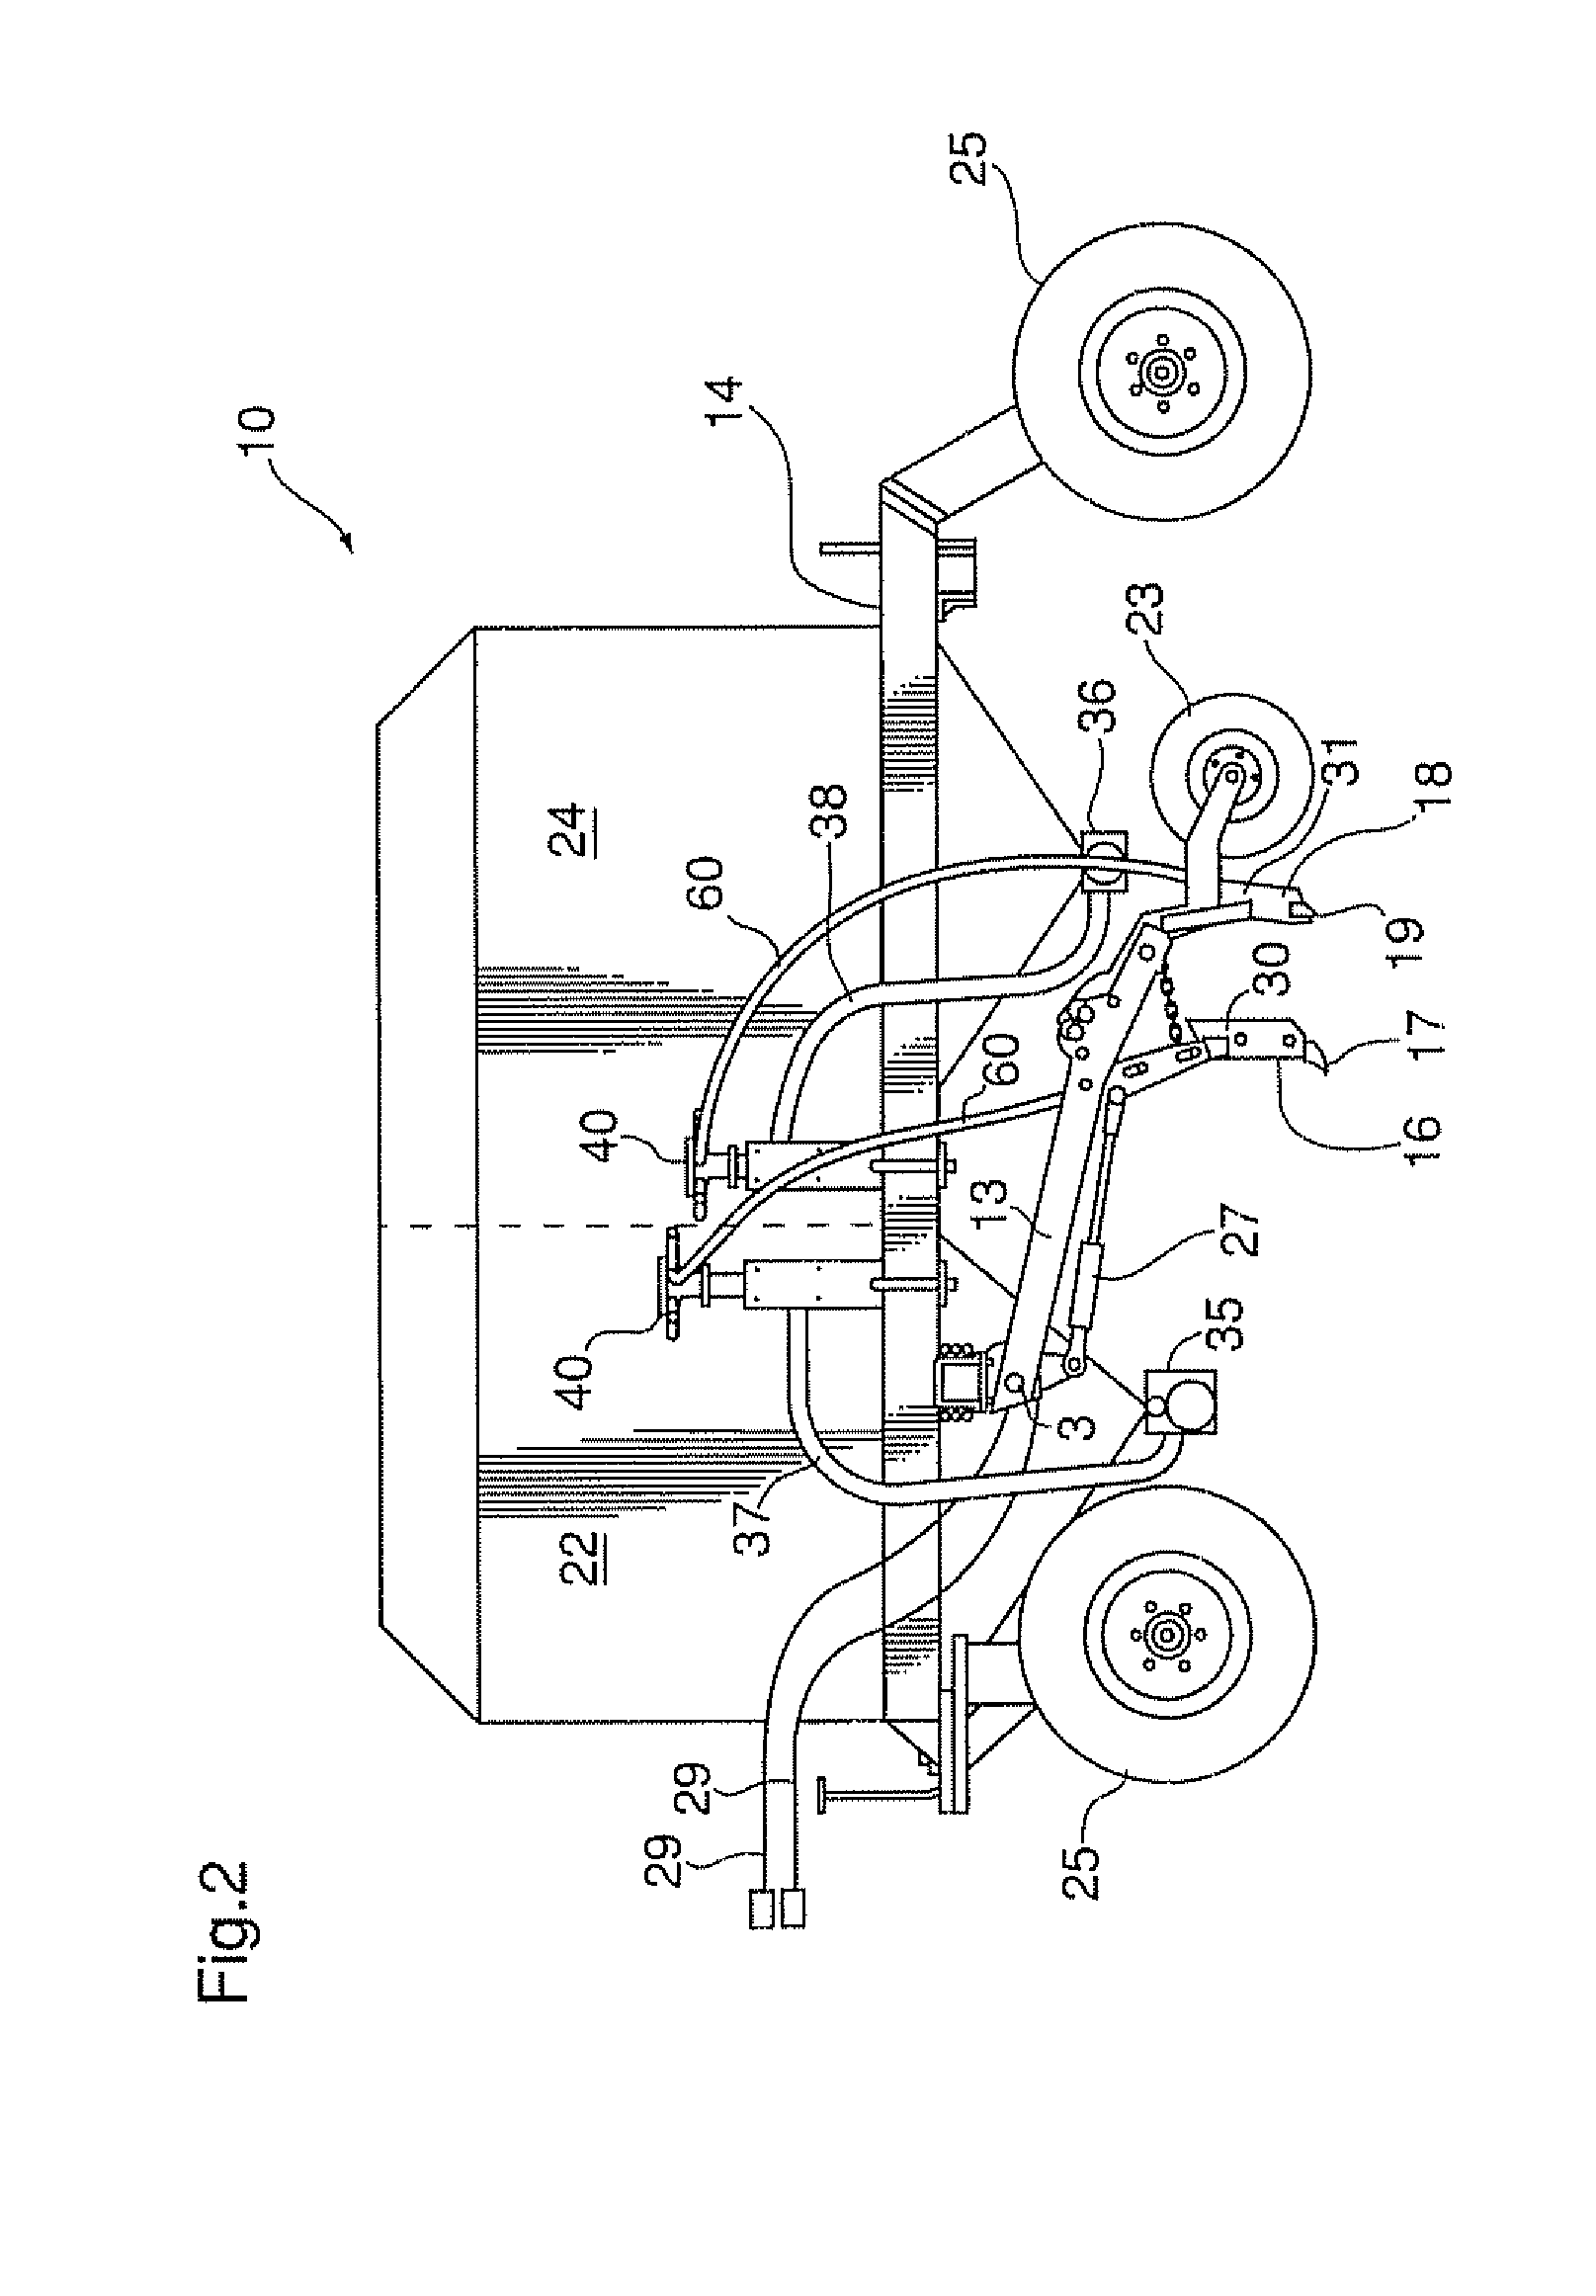 Air seeder/fertilizer apparatus having metering means and distribution manifold with selectively openable ports